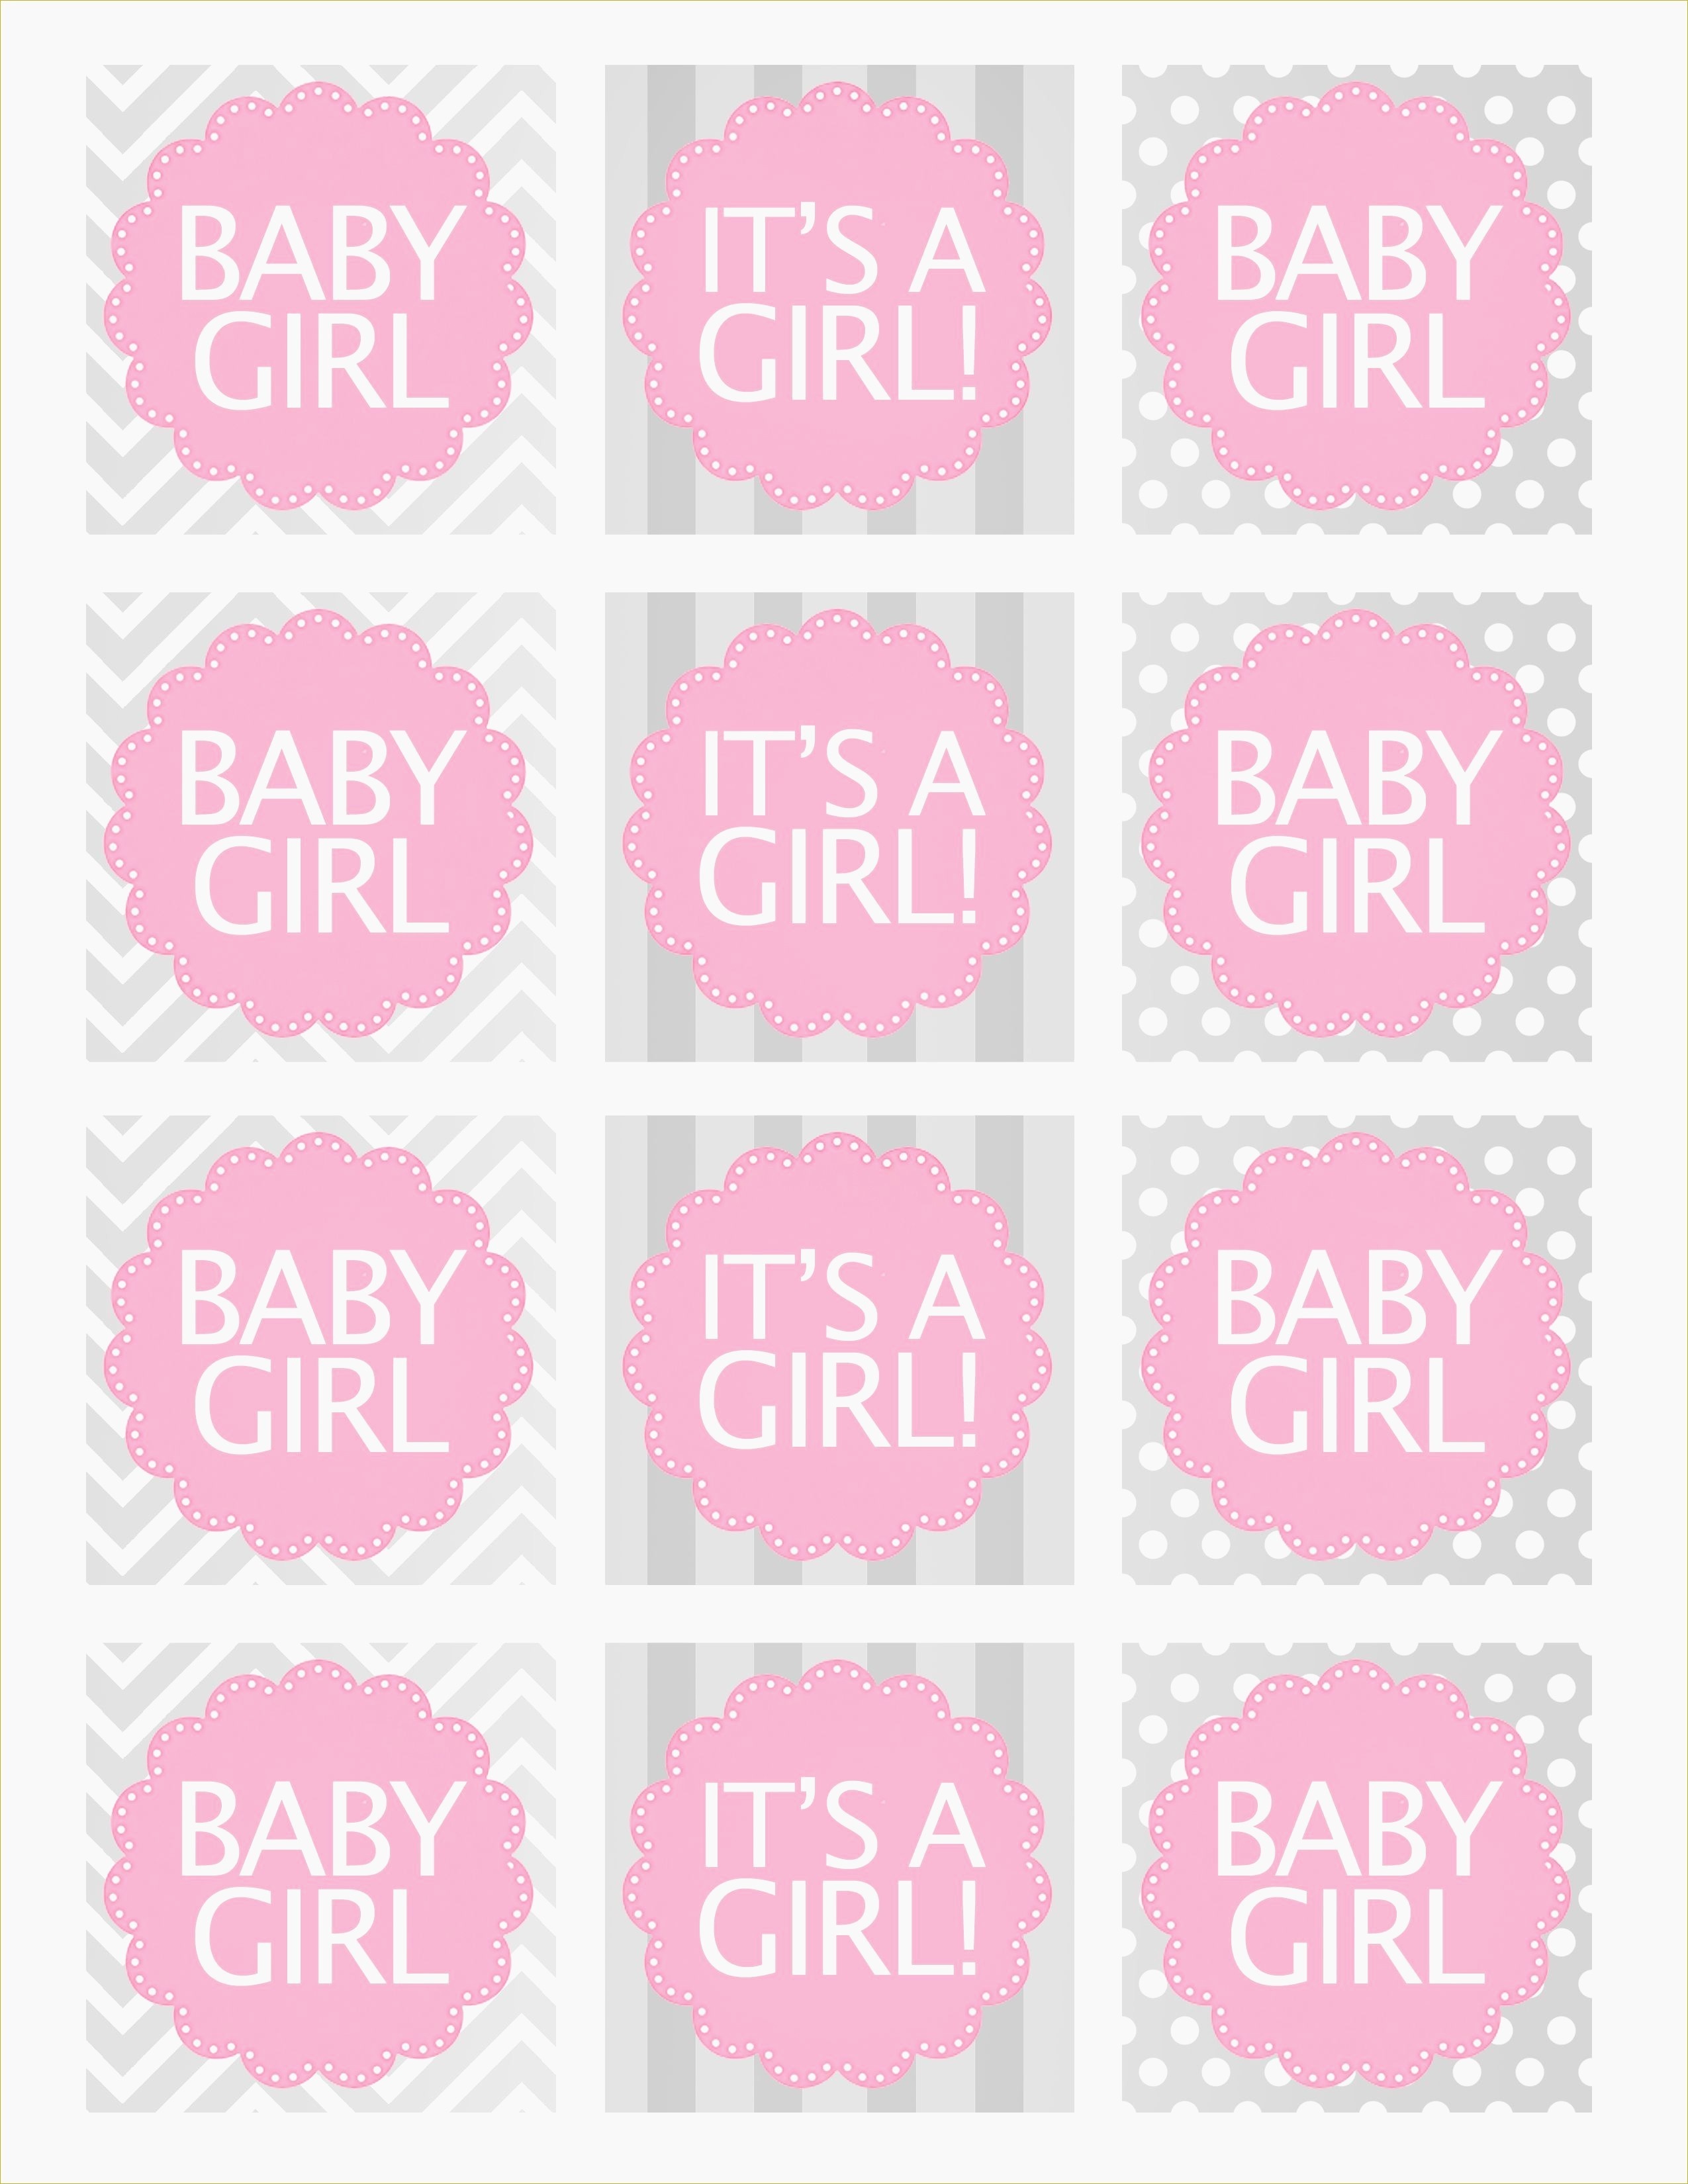 Inspirational Elephant Baby Shower Templates | Www.pantry-Magic - Free Printable Baby Elephant Template